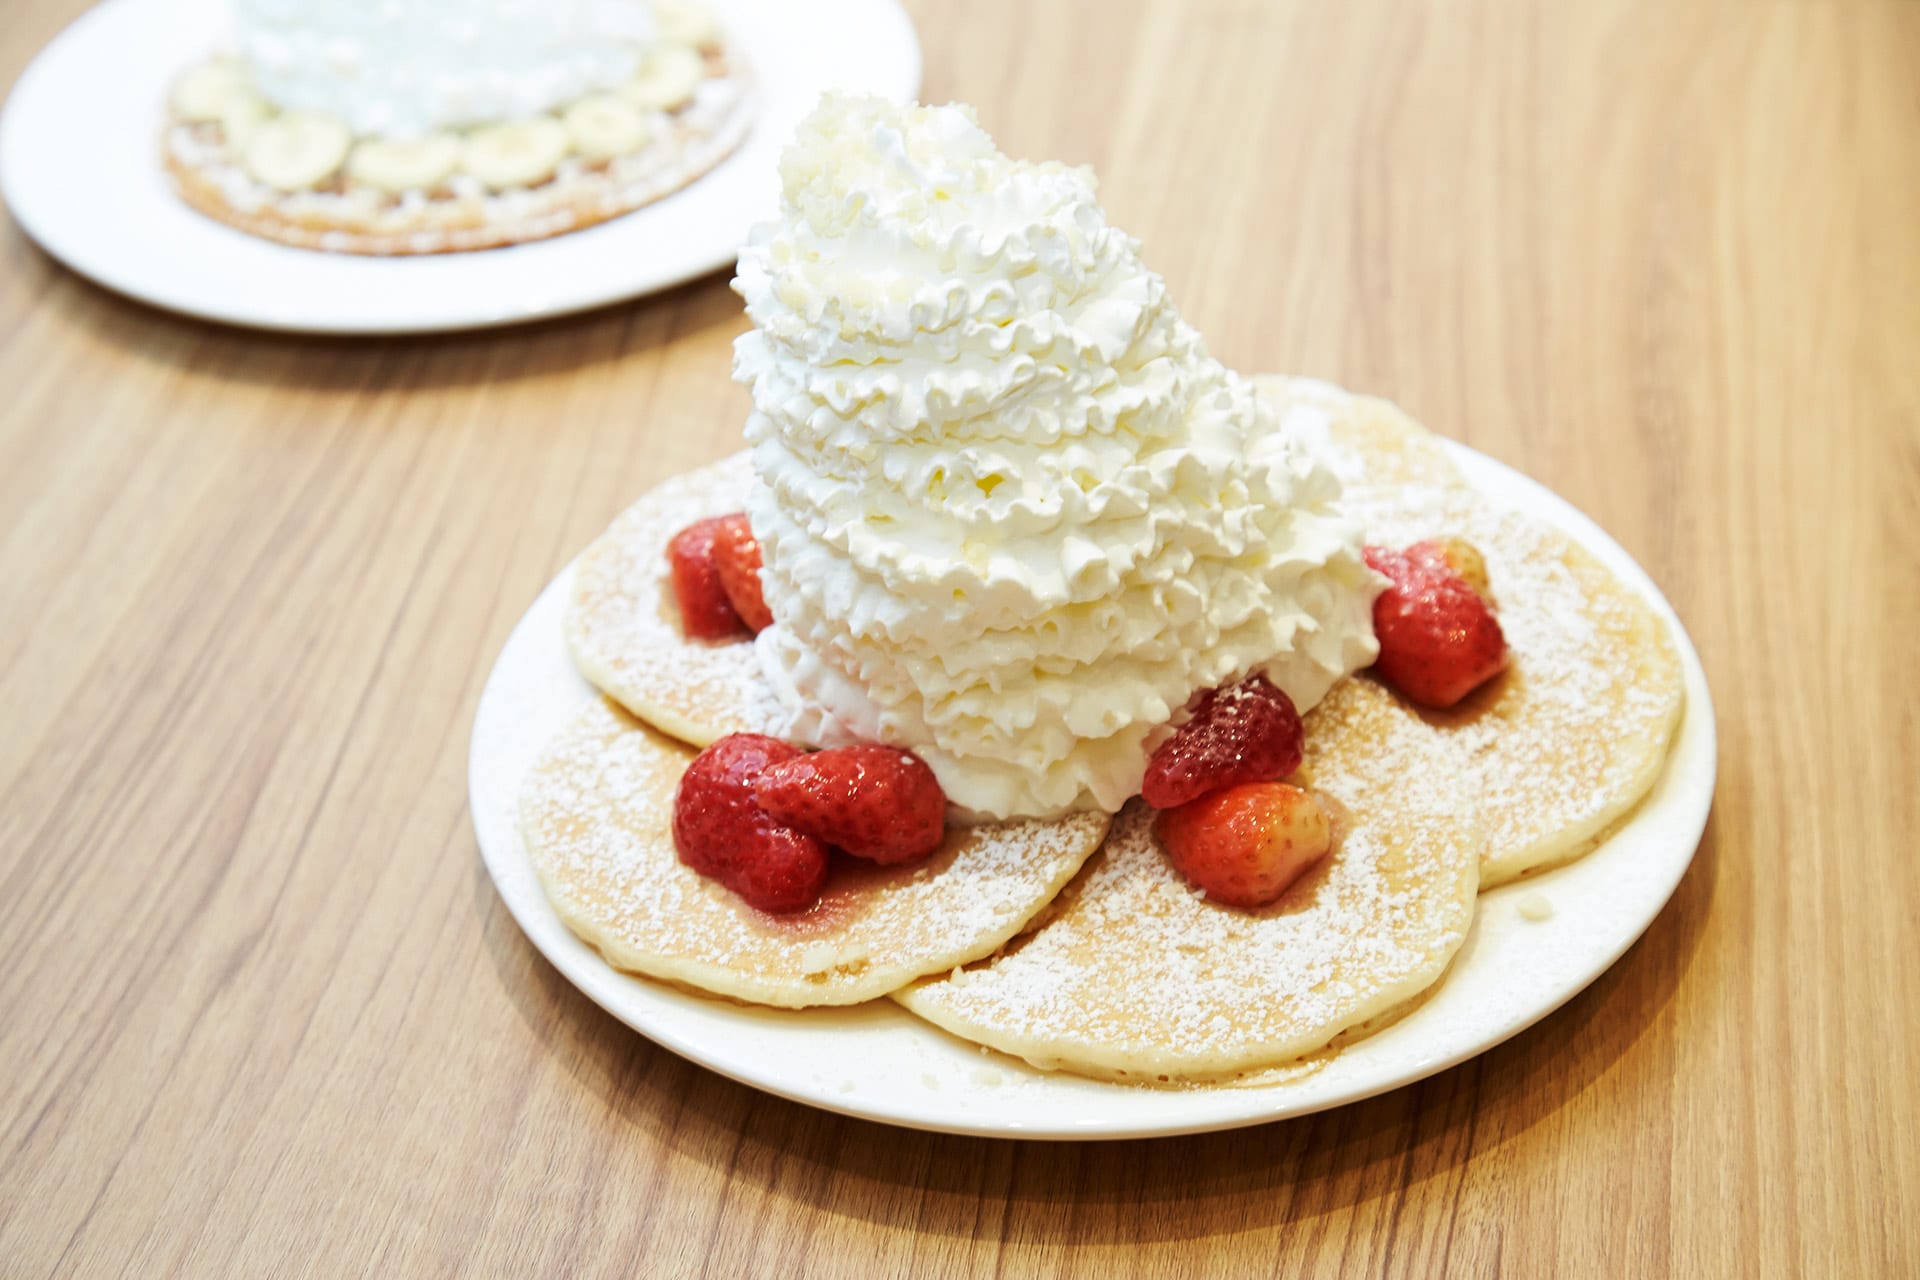 You Deserve Pancakes With A Giant Pile Of Whipped Cream This Weekend